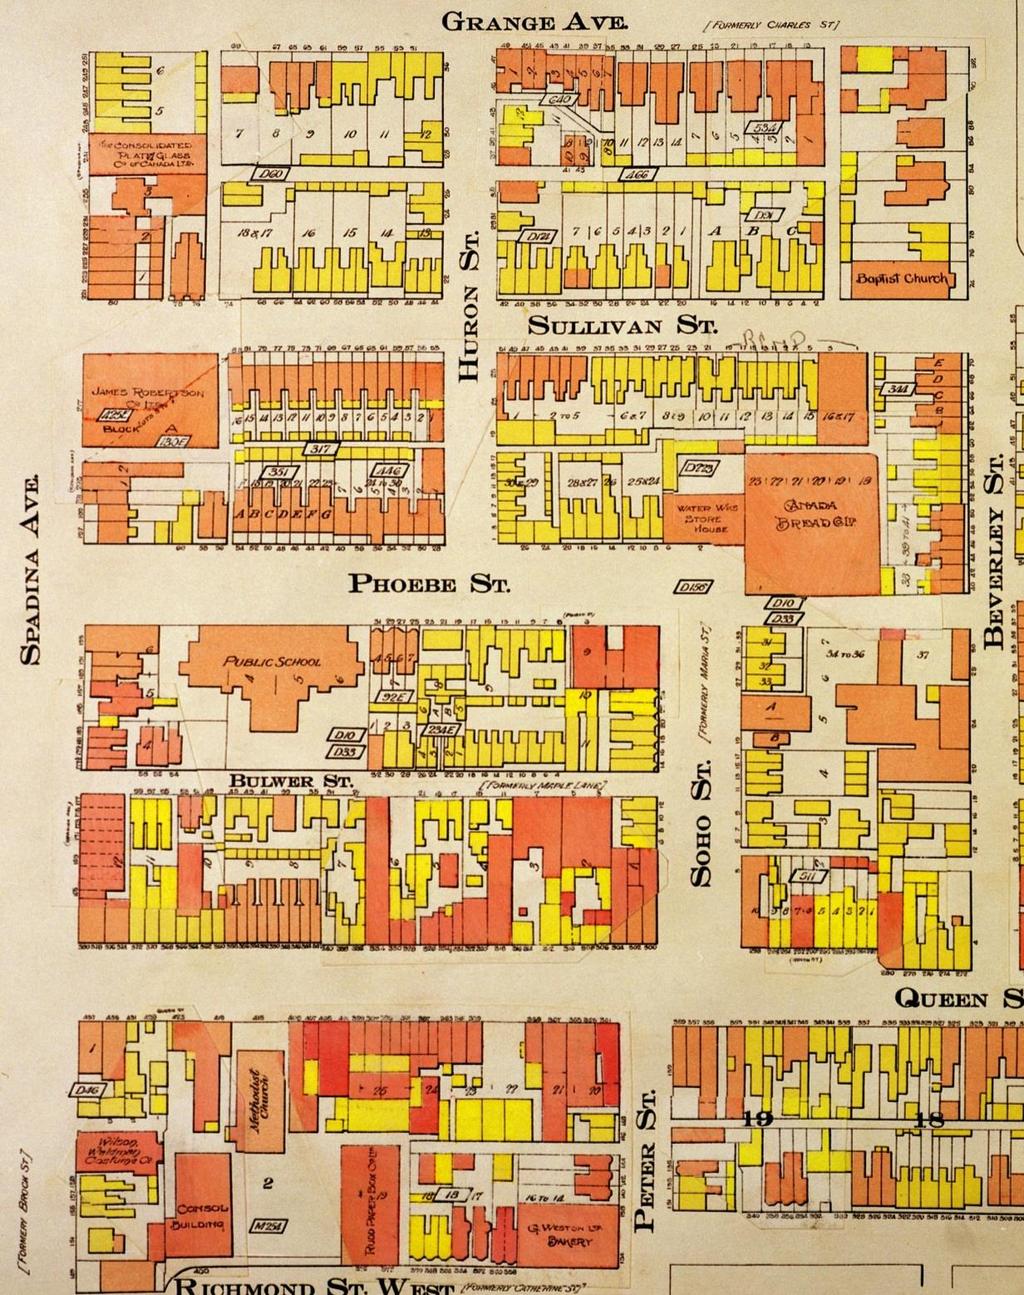 Goad s Fire Map of Toronto from 1913 is one of the few maps that shows both the original Weston Model Bakery on Soho and Phoebe Streets and the new Biscuit Factory on Peter